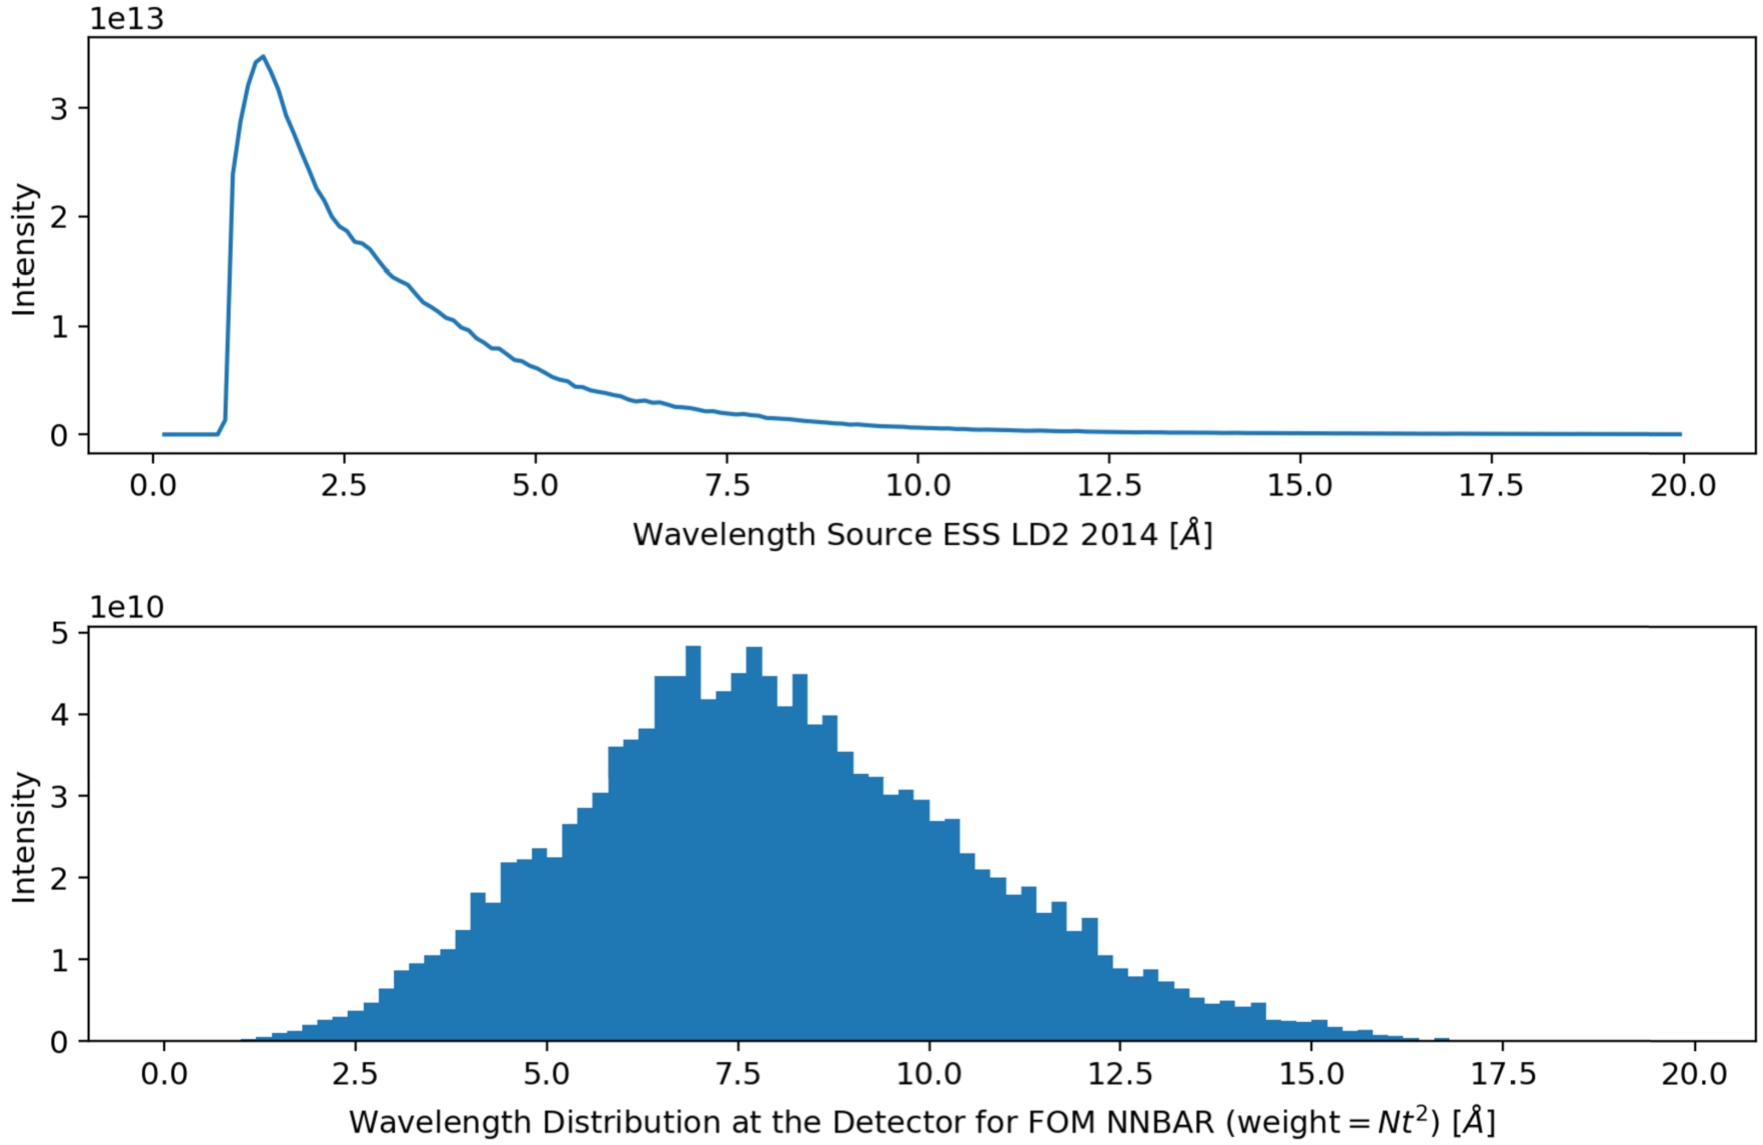 Wavelength spectrum of the LD2 source (upper plot) and the distribution of wavelength contribution to FOM for NNBAR (lower plot).